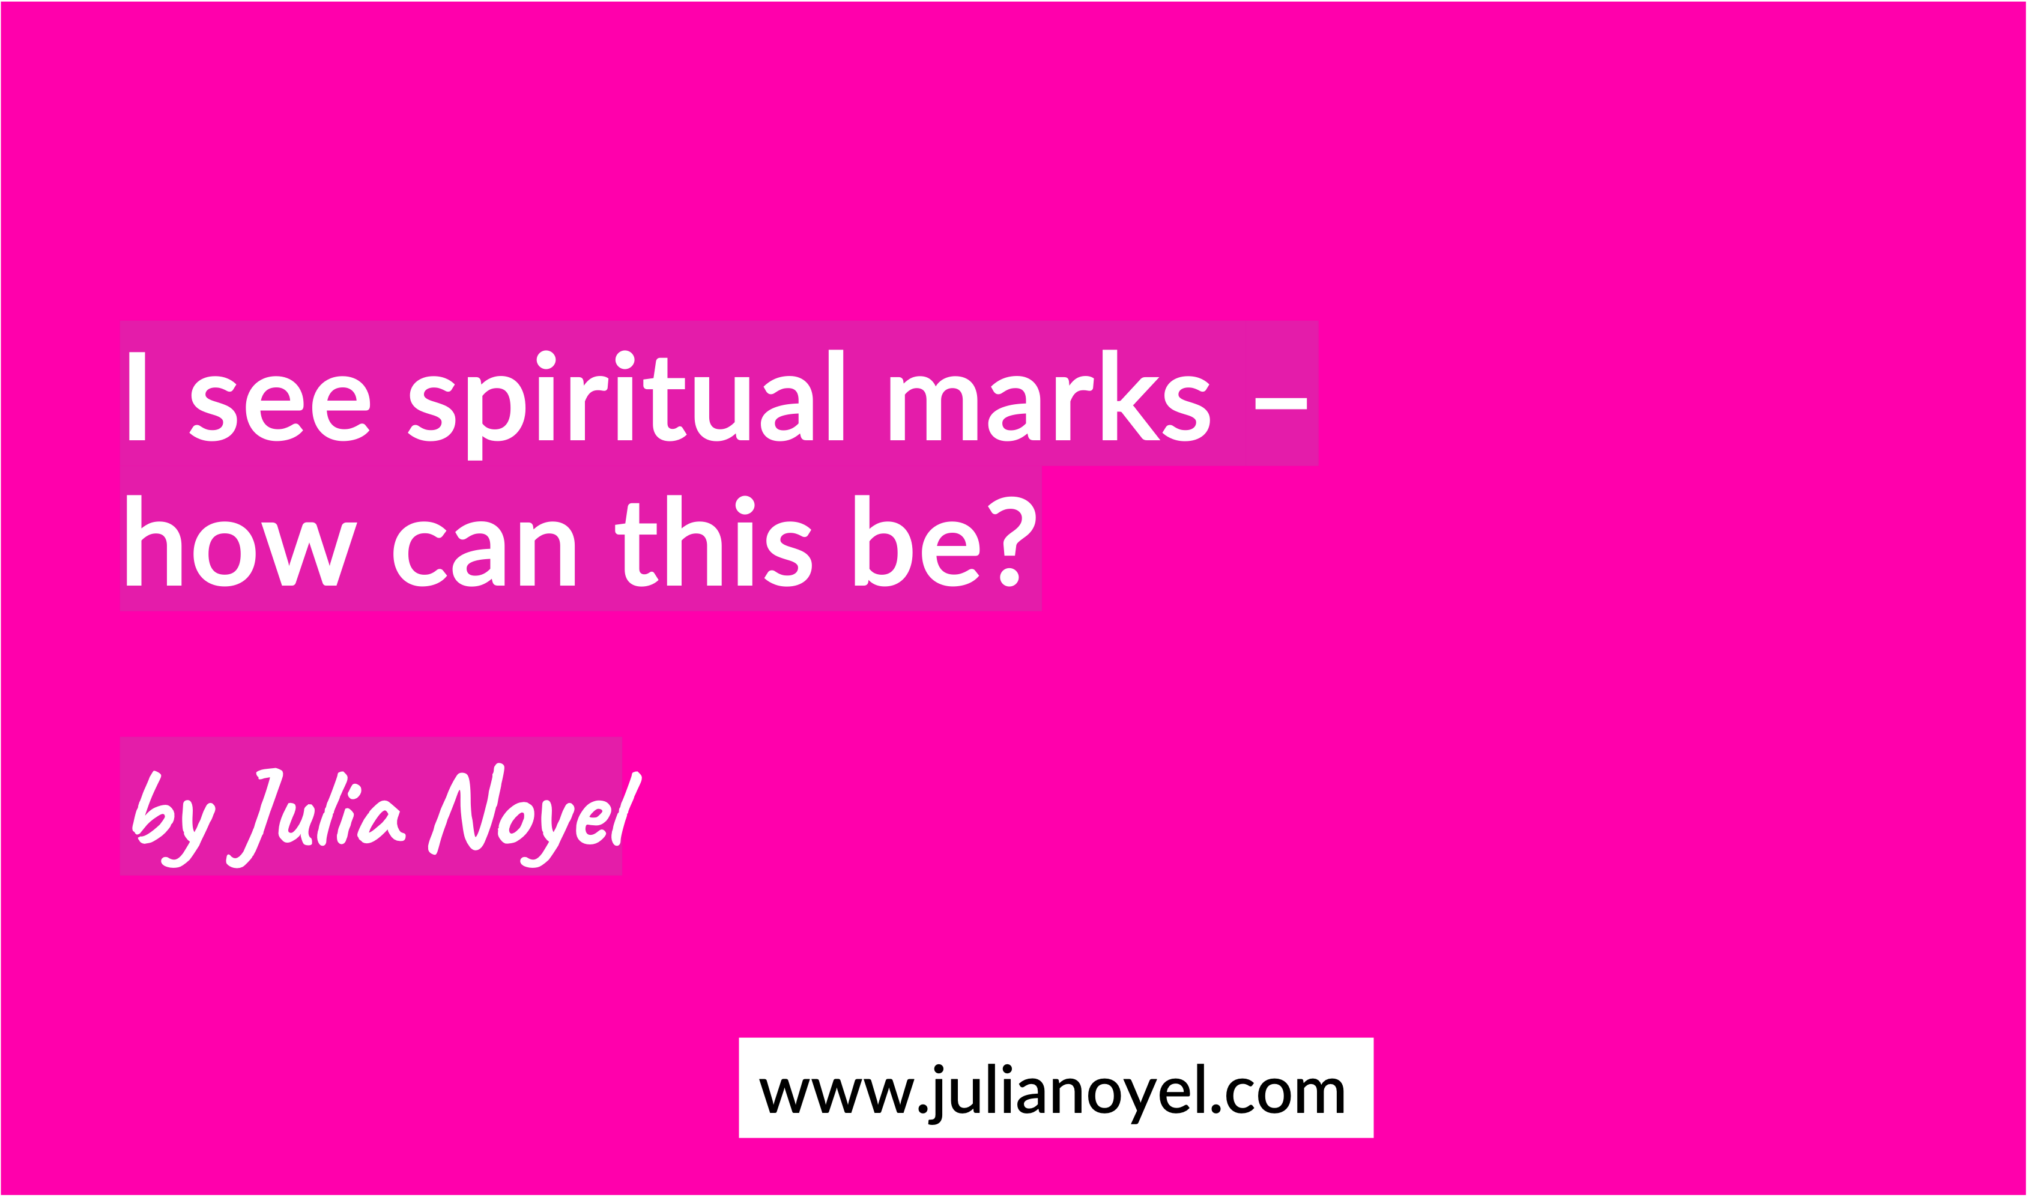 I see spiritual marks - how can this be? by Julia Noyel